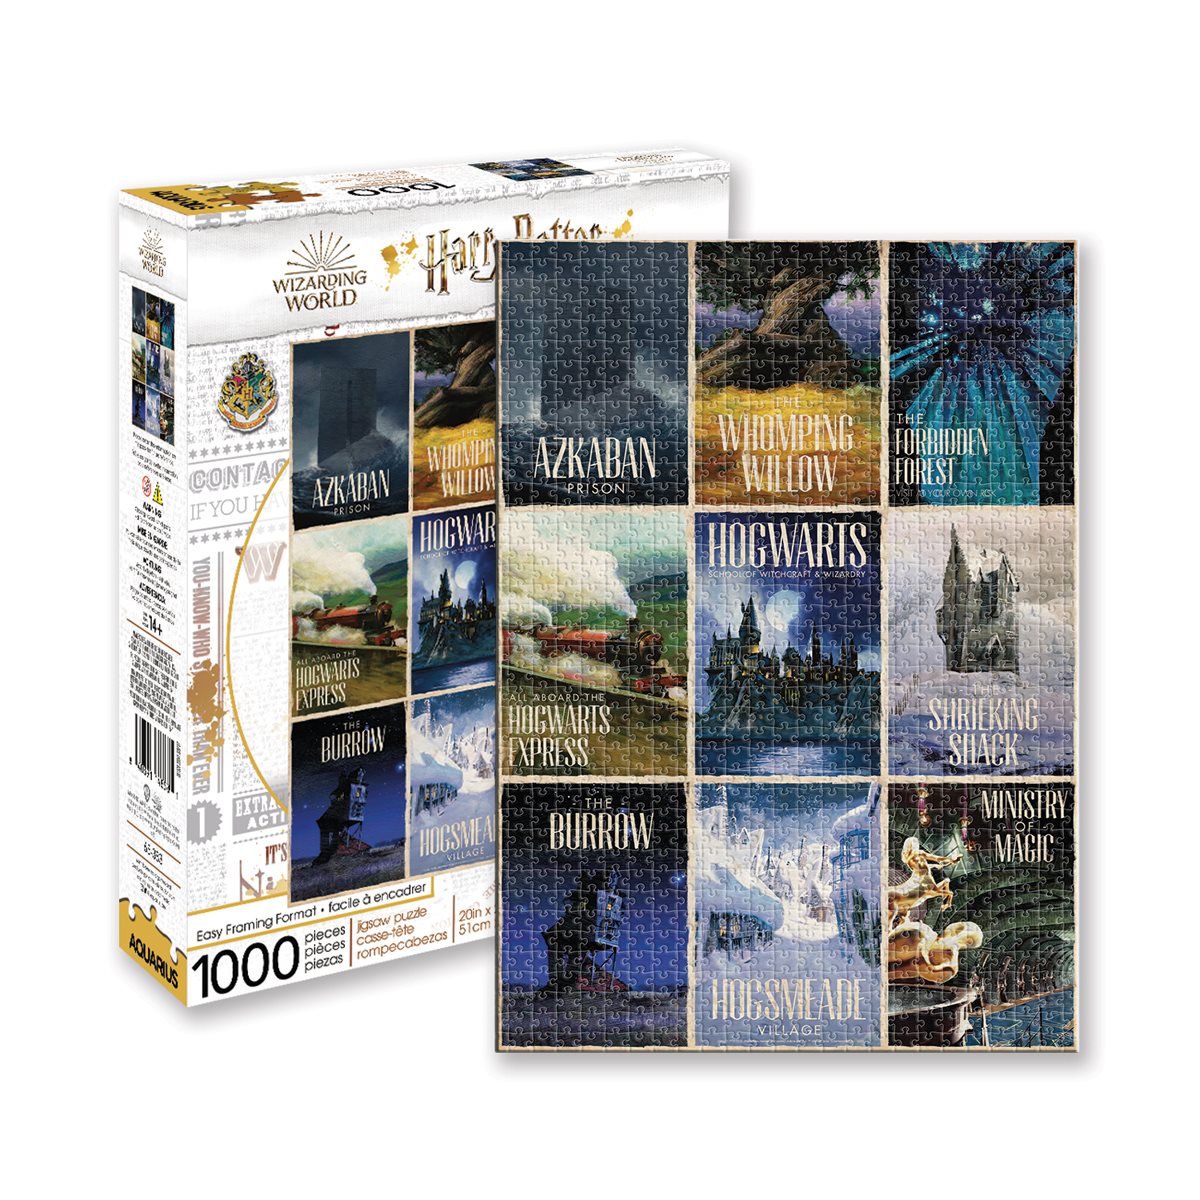 Aquarius Harry Potter Express 1000 Piece Puzzle* IN STOCK* FREE US SHIPPING* 